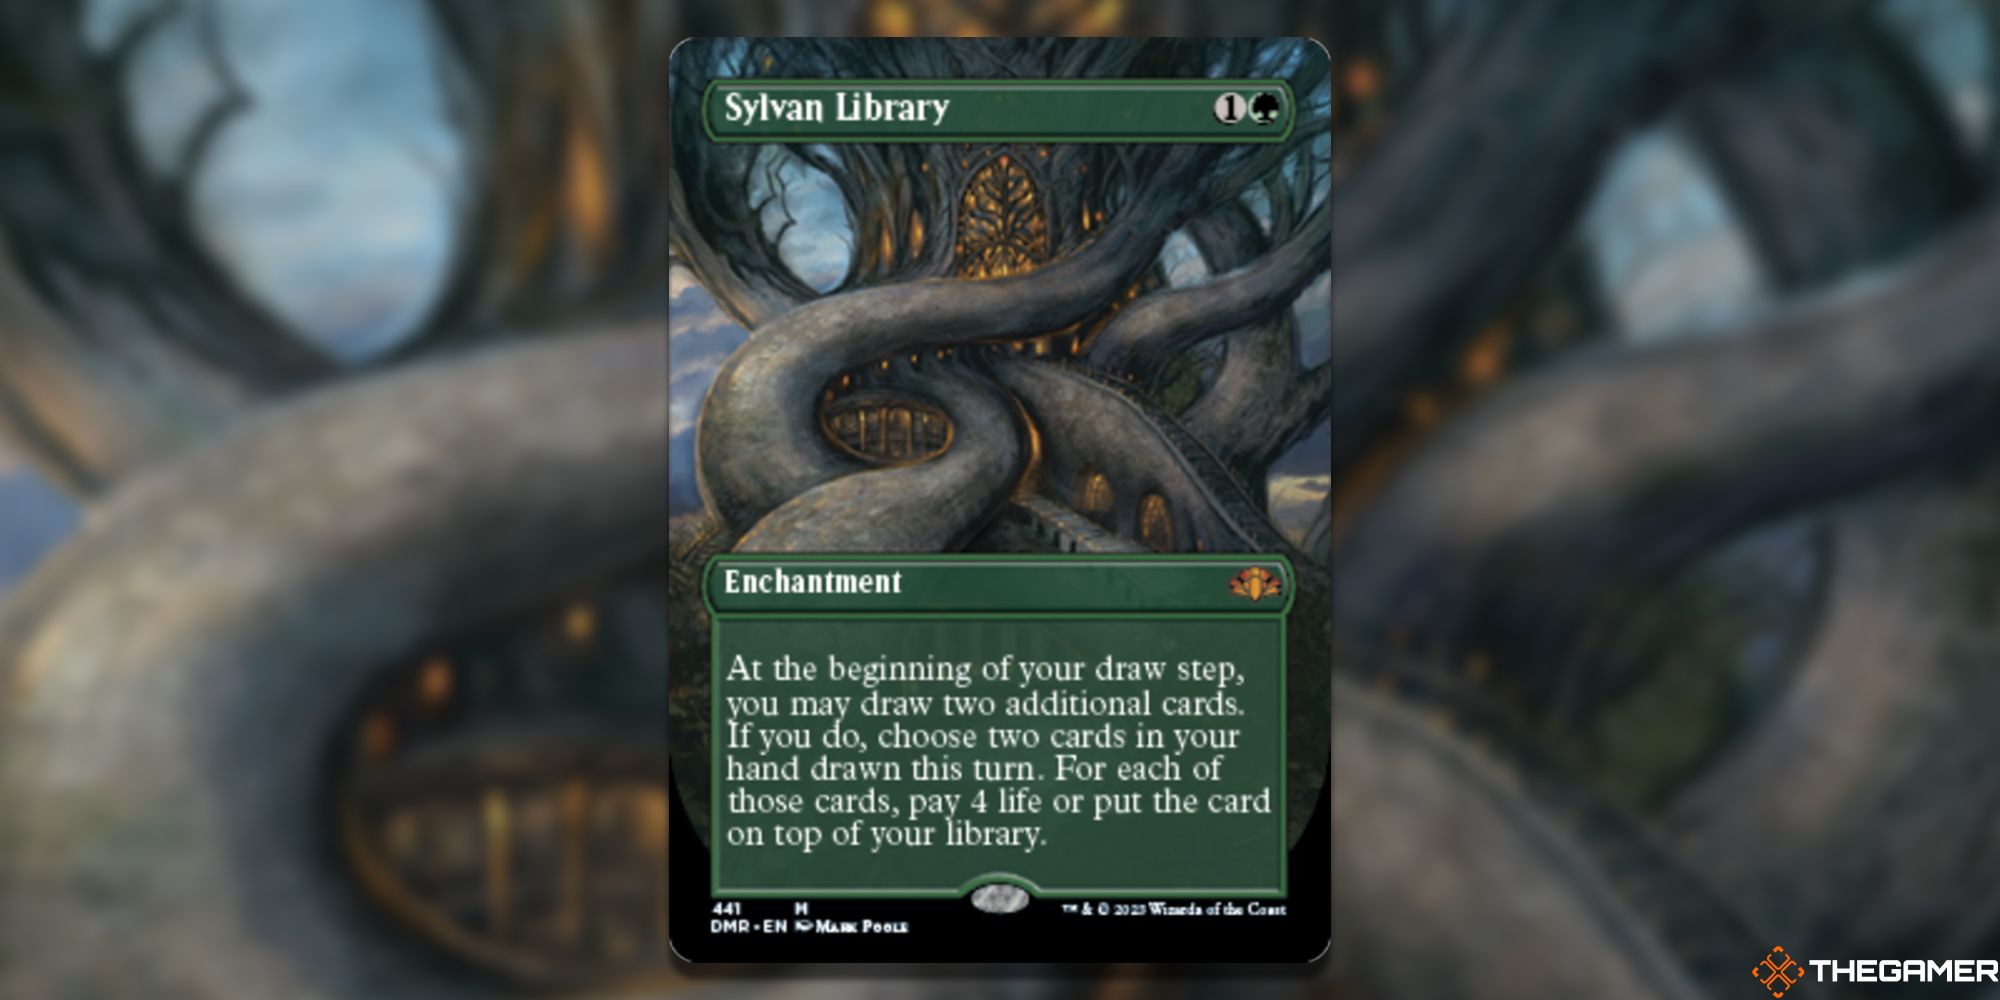  Image of the Sylvan Library Borderless card in Magic: The Gathering, with art by Mark Poole